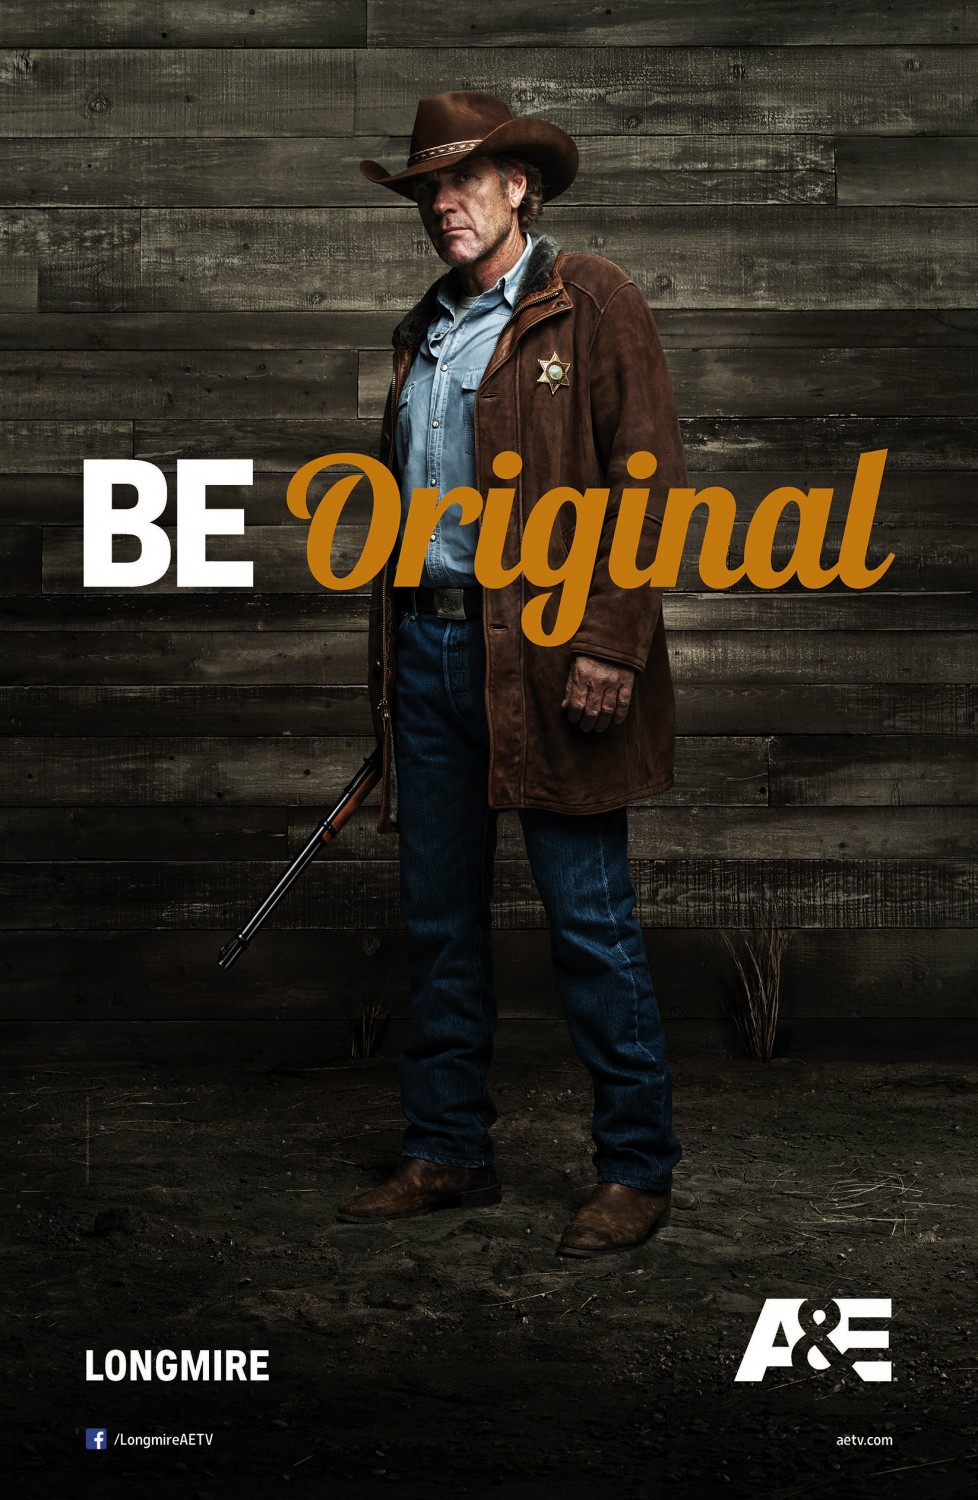 Extra Large Movie Poster Image for Longmire (#4 of 8)